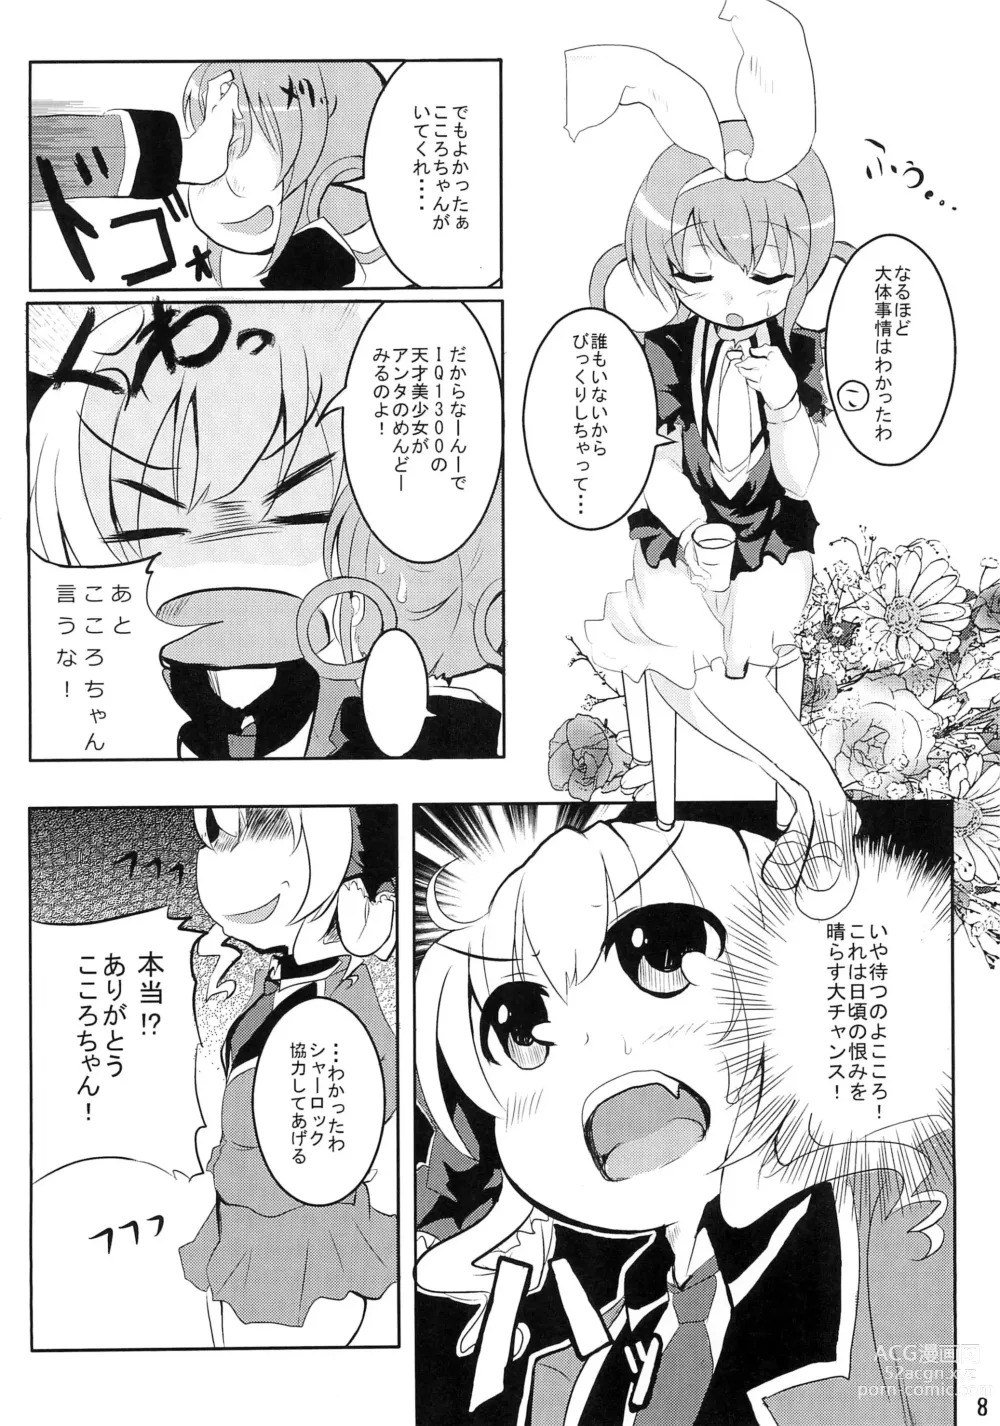 Page 8 of doujinshi Milky Syrup